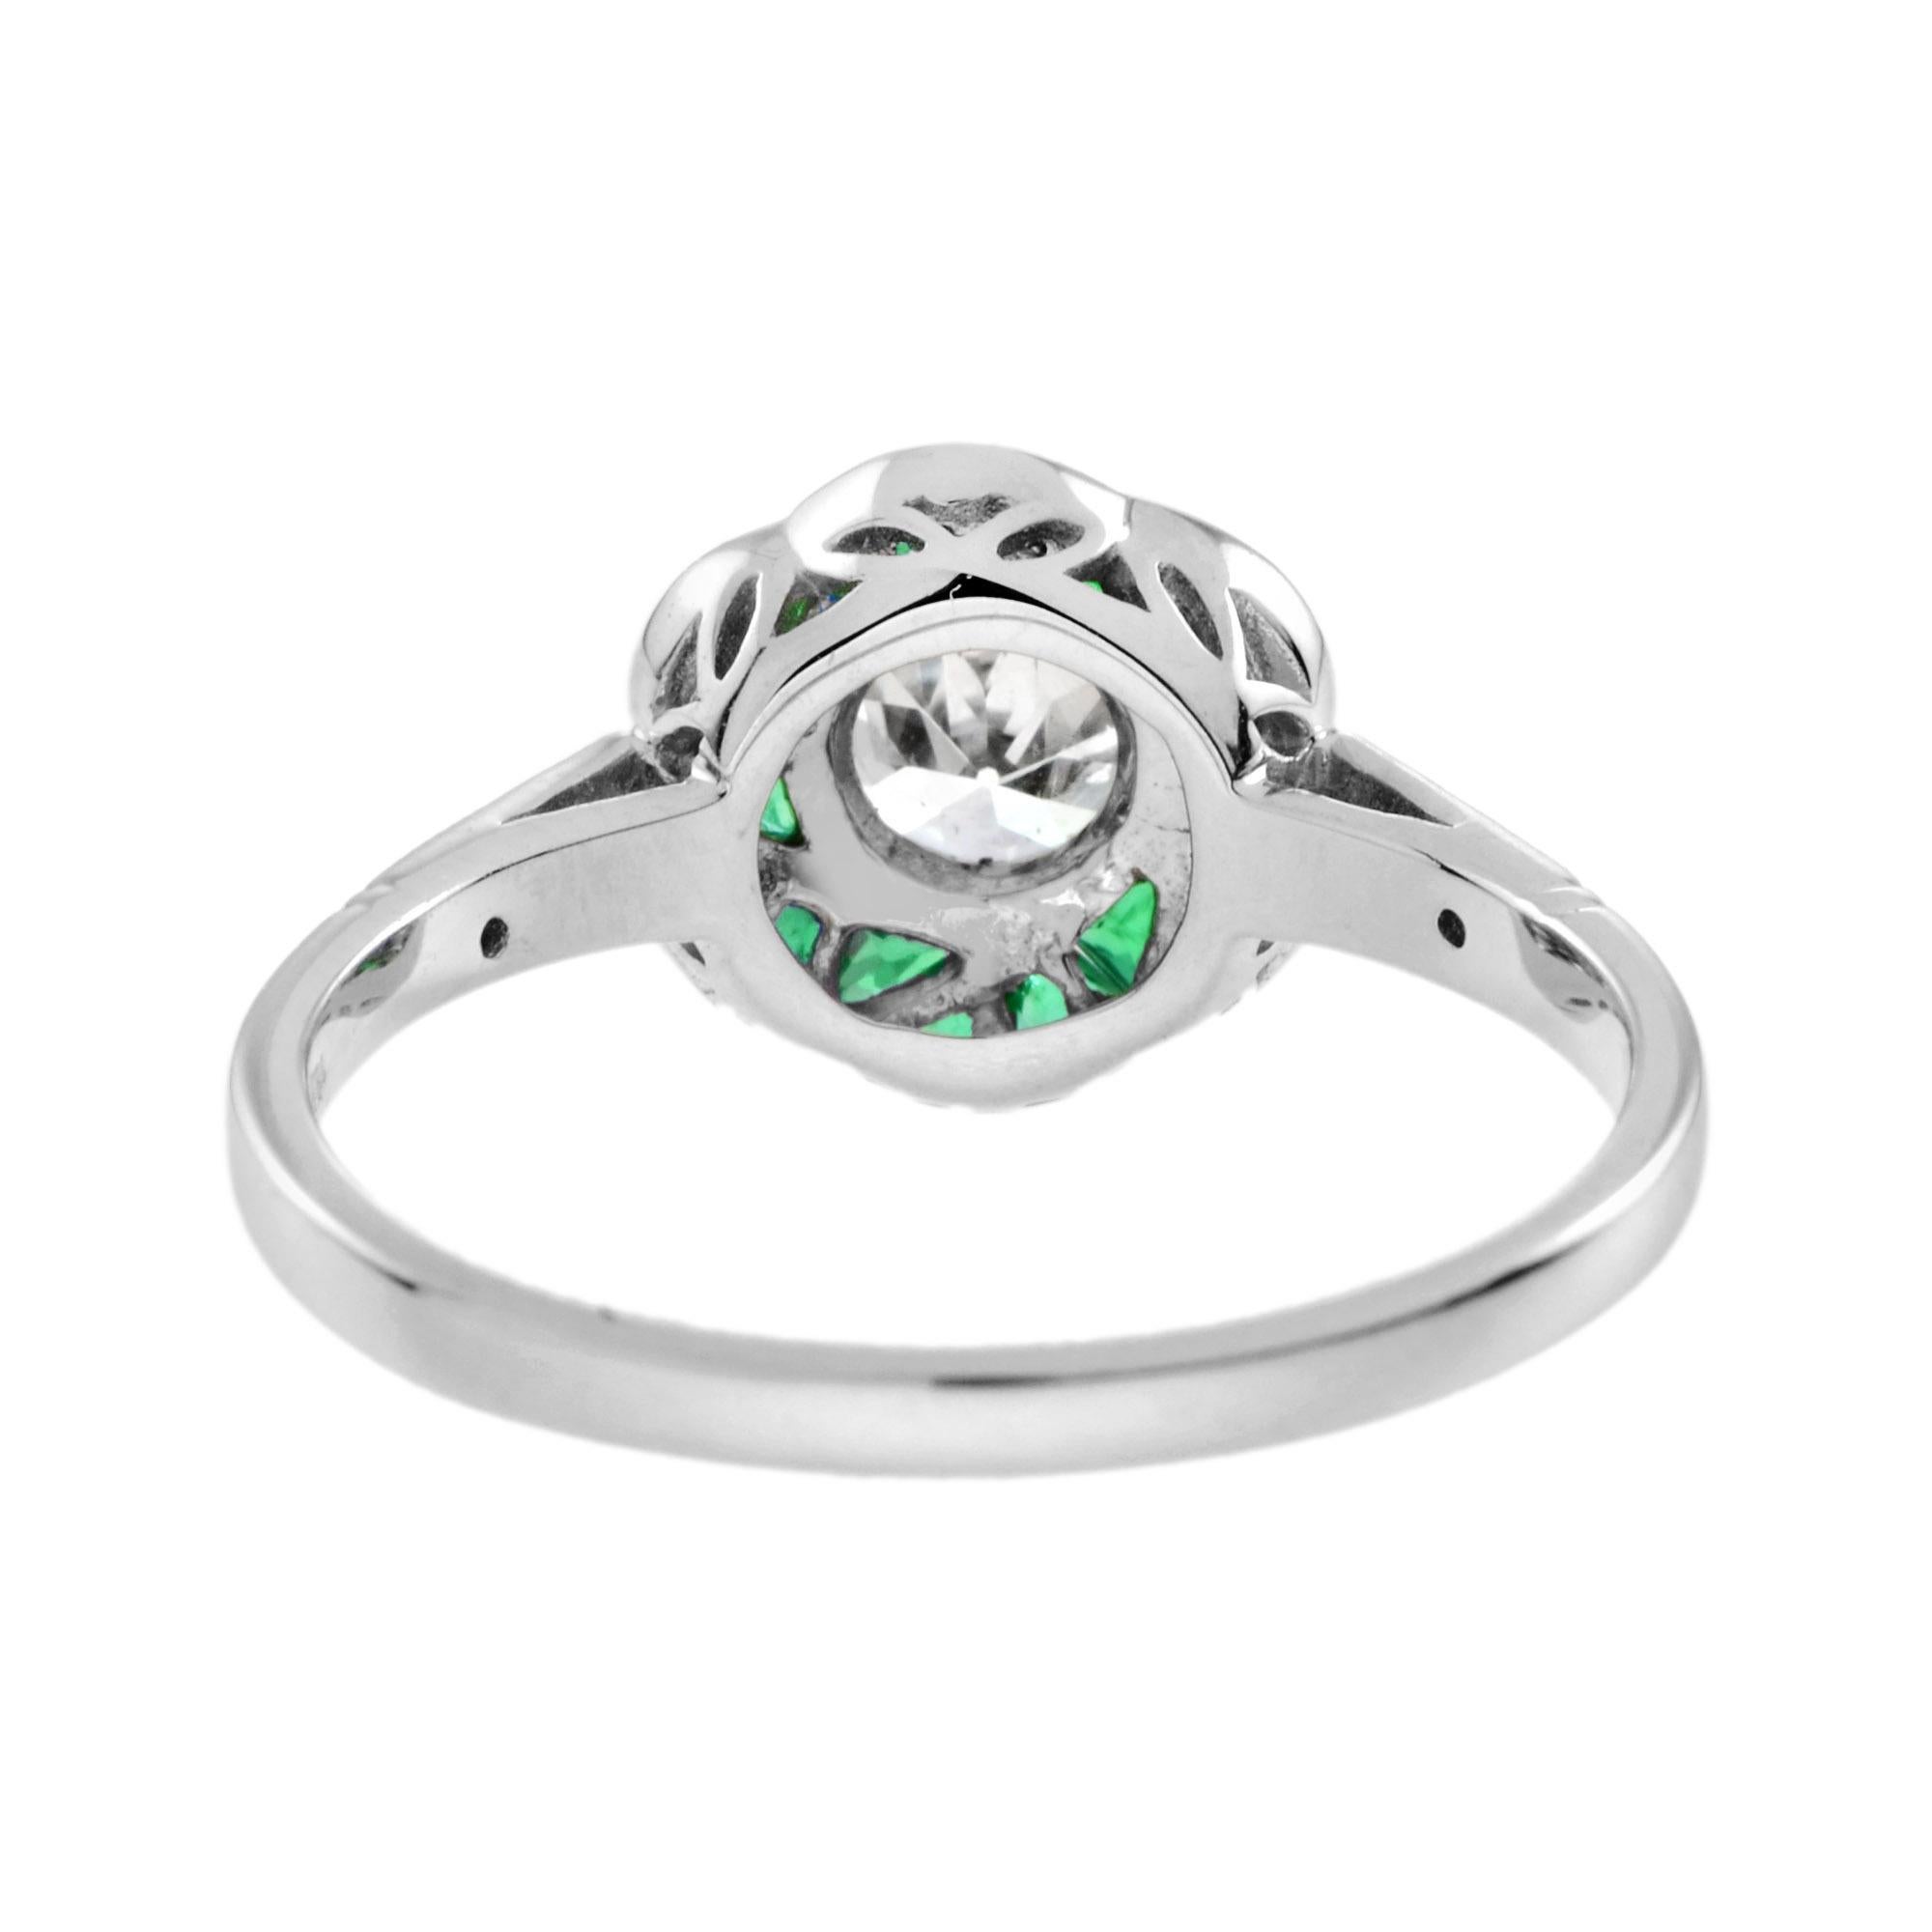 For Sale:  Diamond and Emerald Art Deco Style Rose Flower Ring in 18K White Gold 5